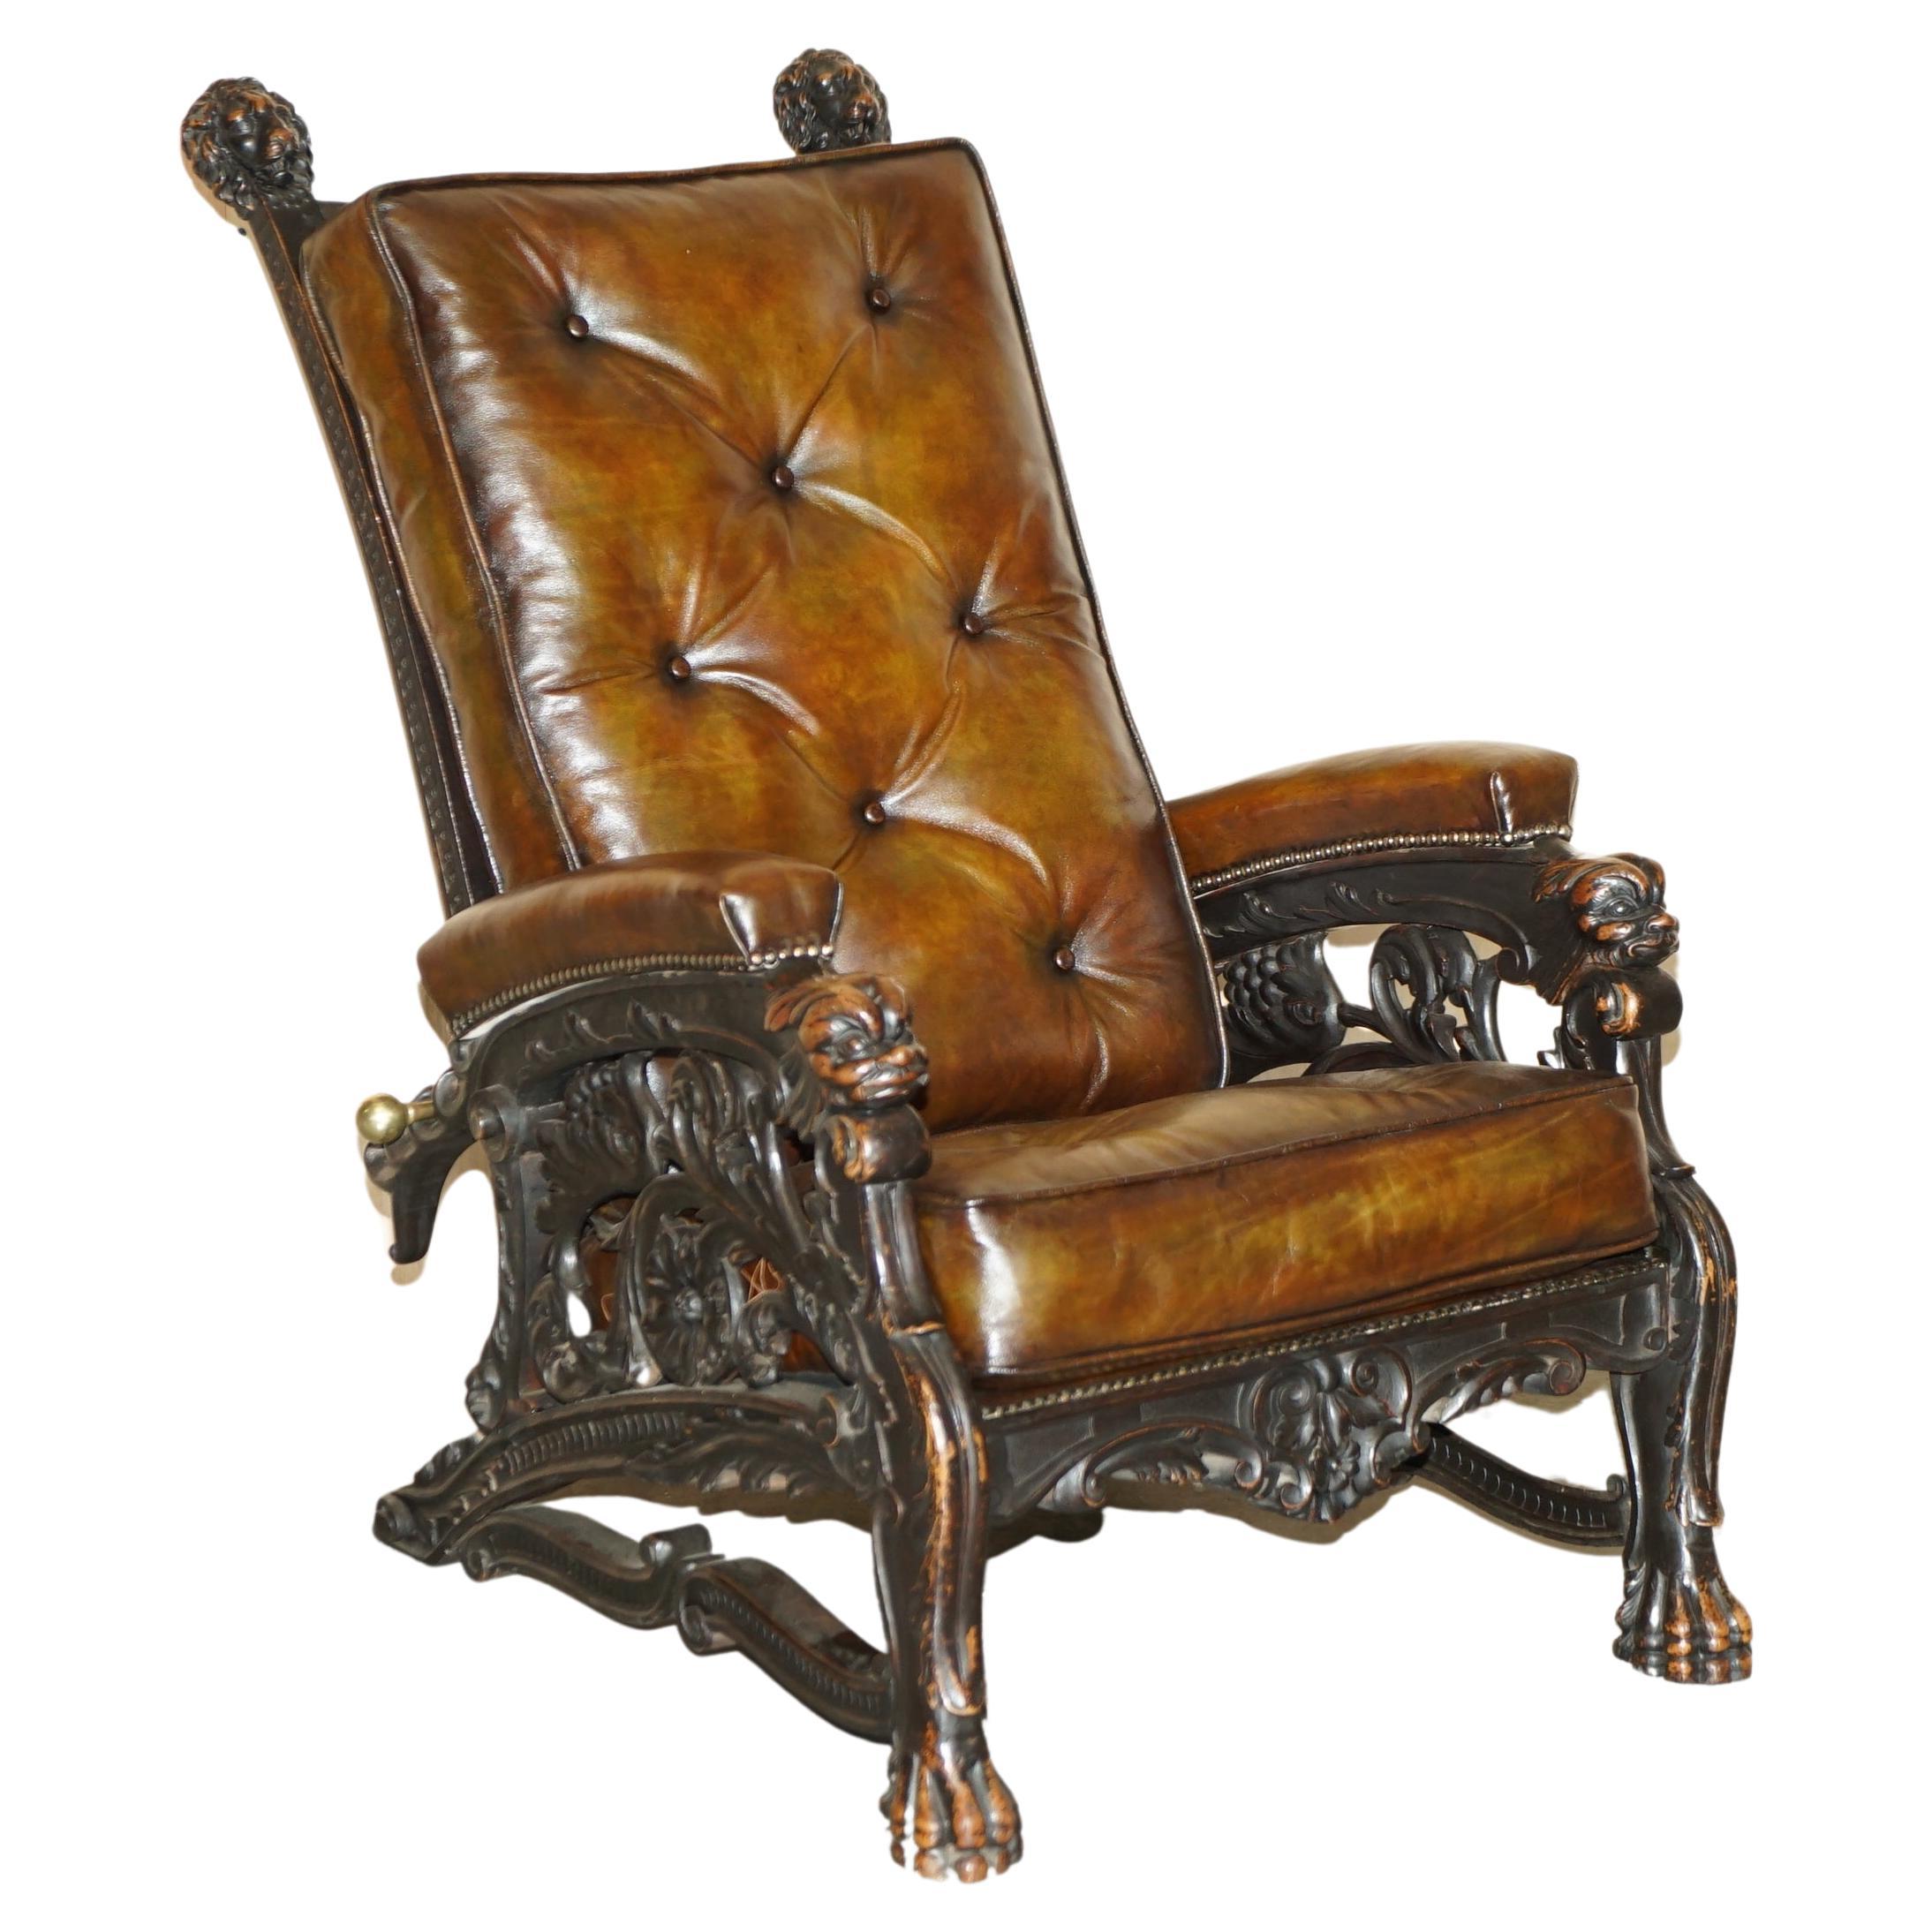 Important Museum Quality Antique Victorian Hand Carved Lion Reclining Armchair